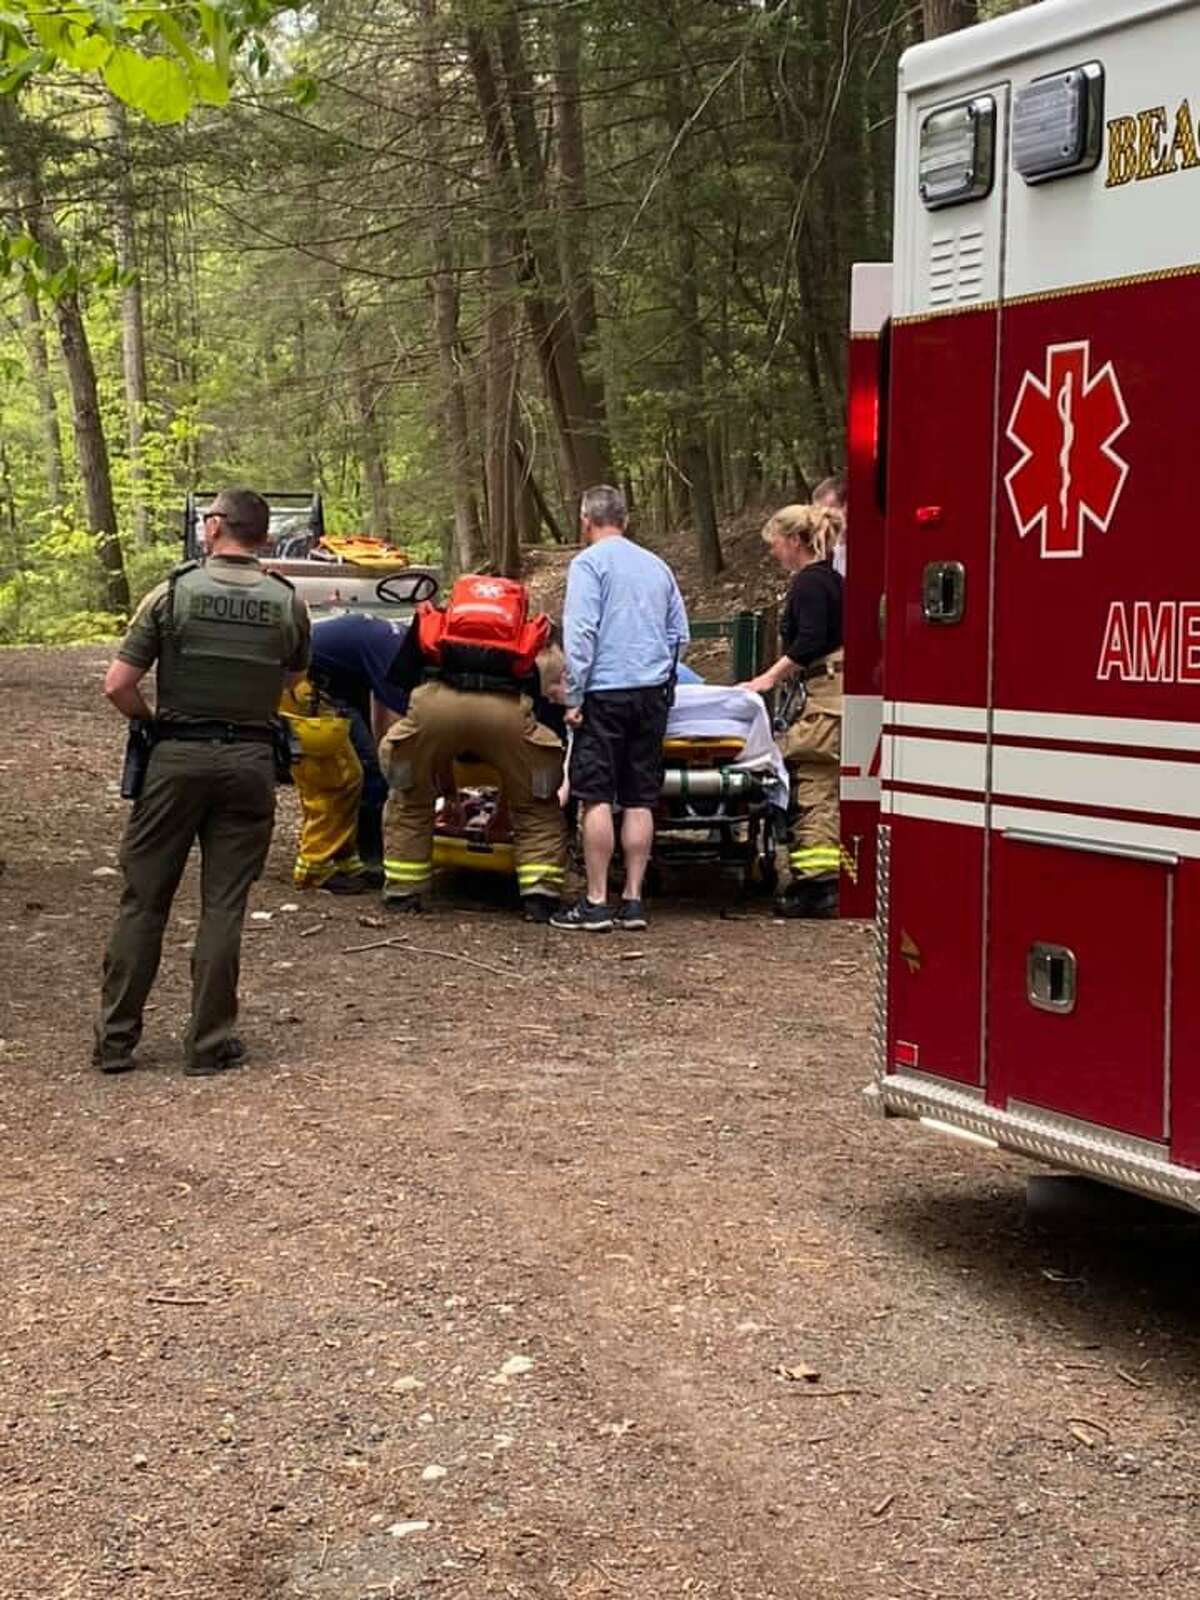 Crews at High Rock Park in Naugatuck, Conn., for a hiker rescue on Monday, May 10, 2021.